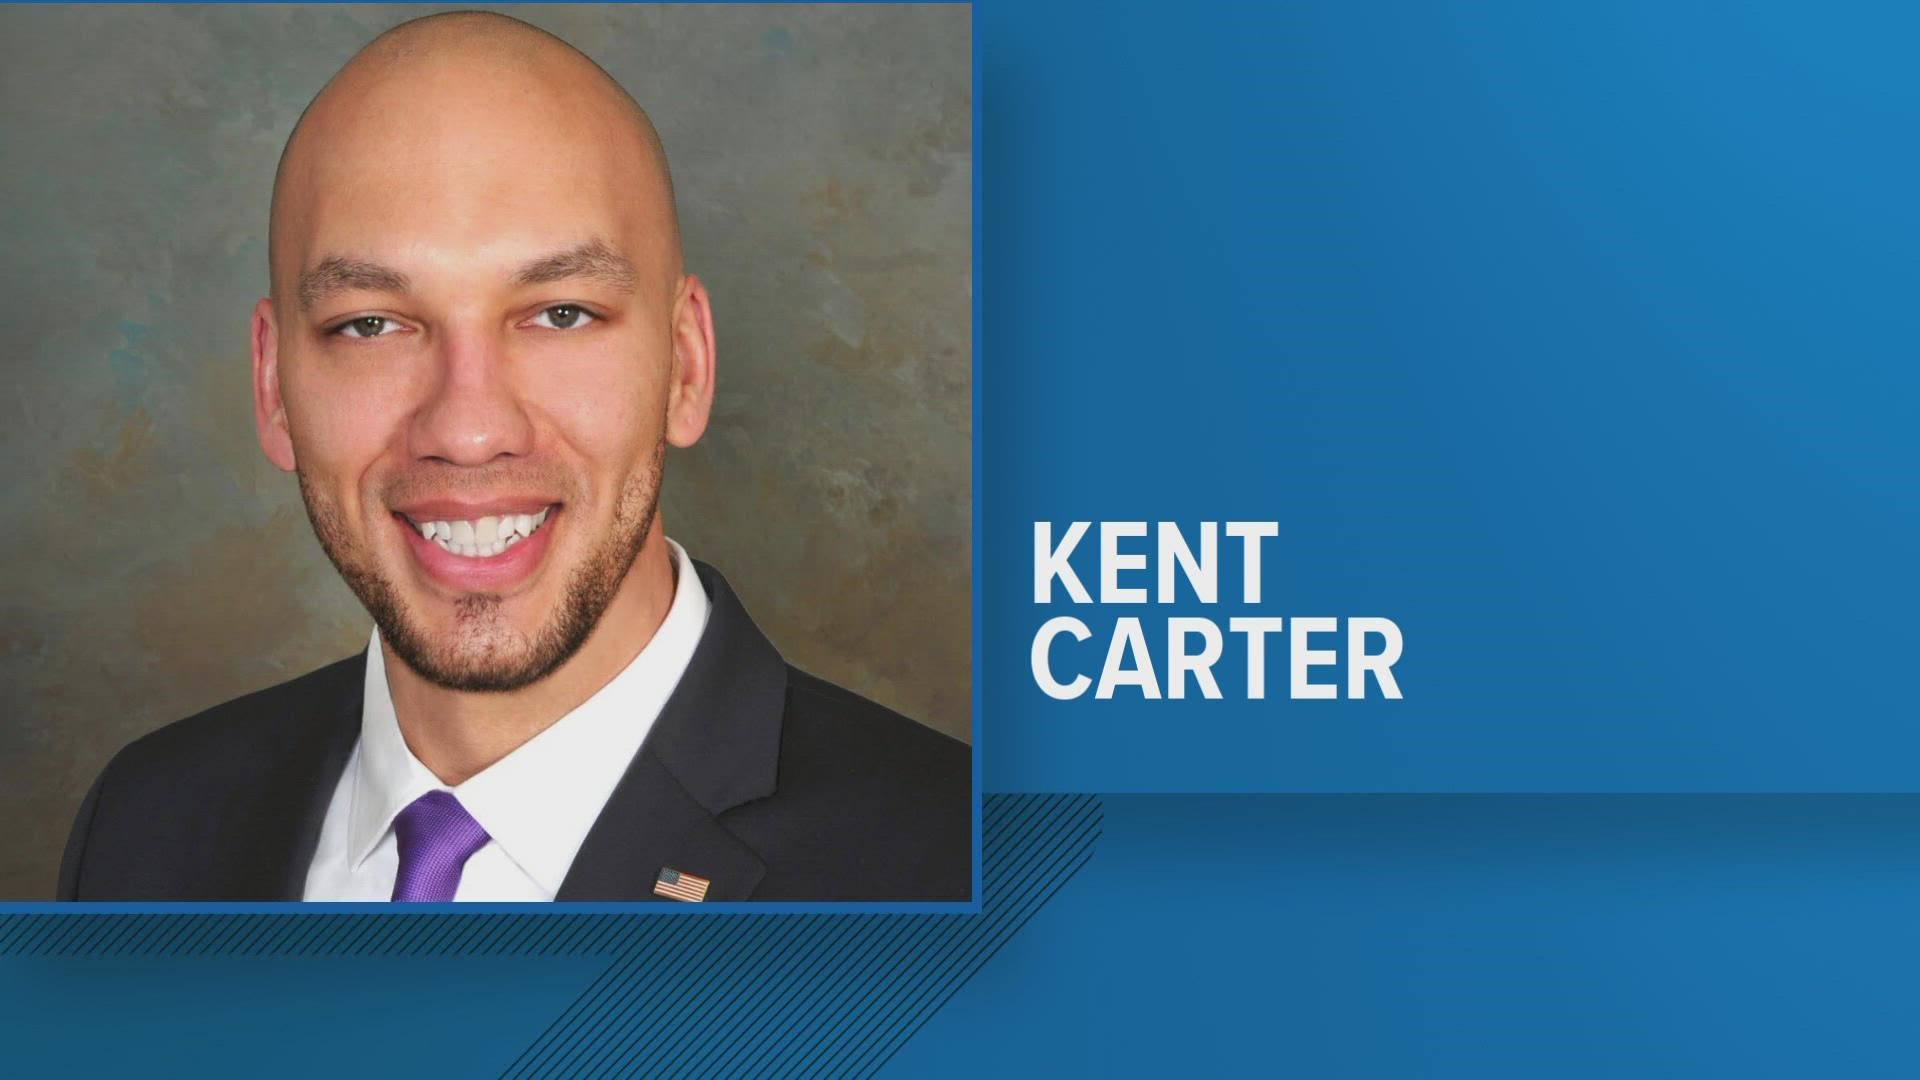 Police in the Turks and Caicos said Kent Carter was with another tourist and three guides from a local business when their car was attacked by gang members.